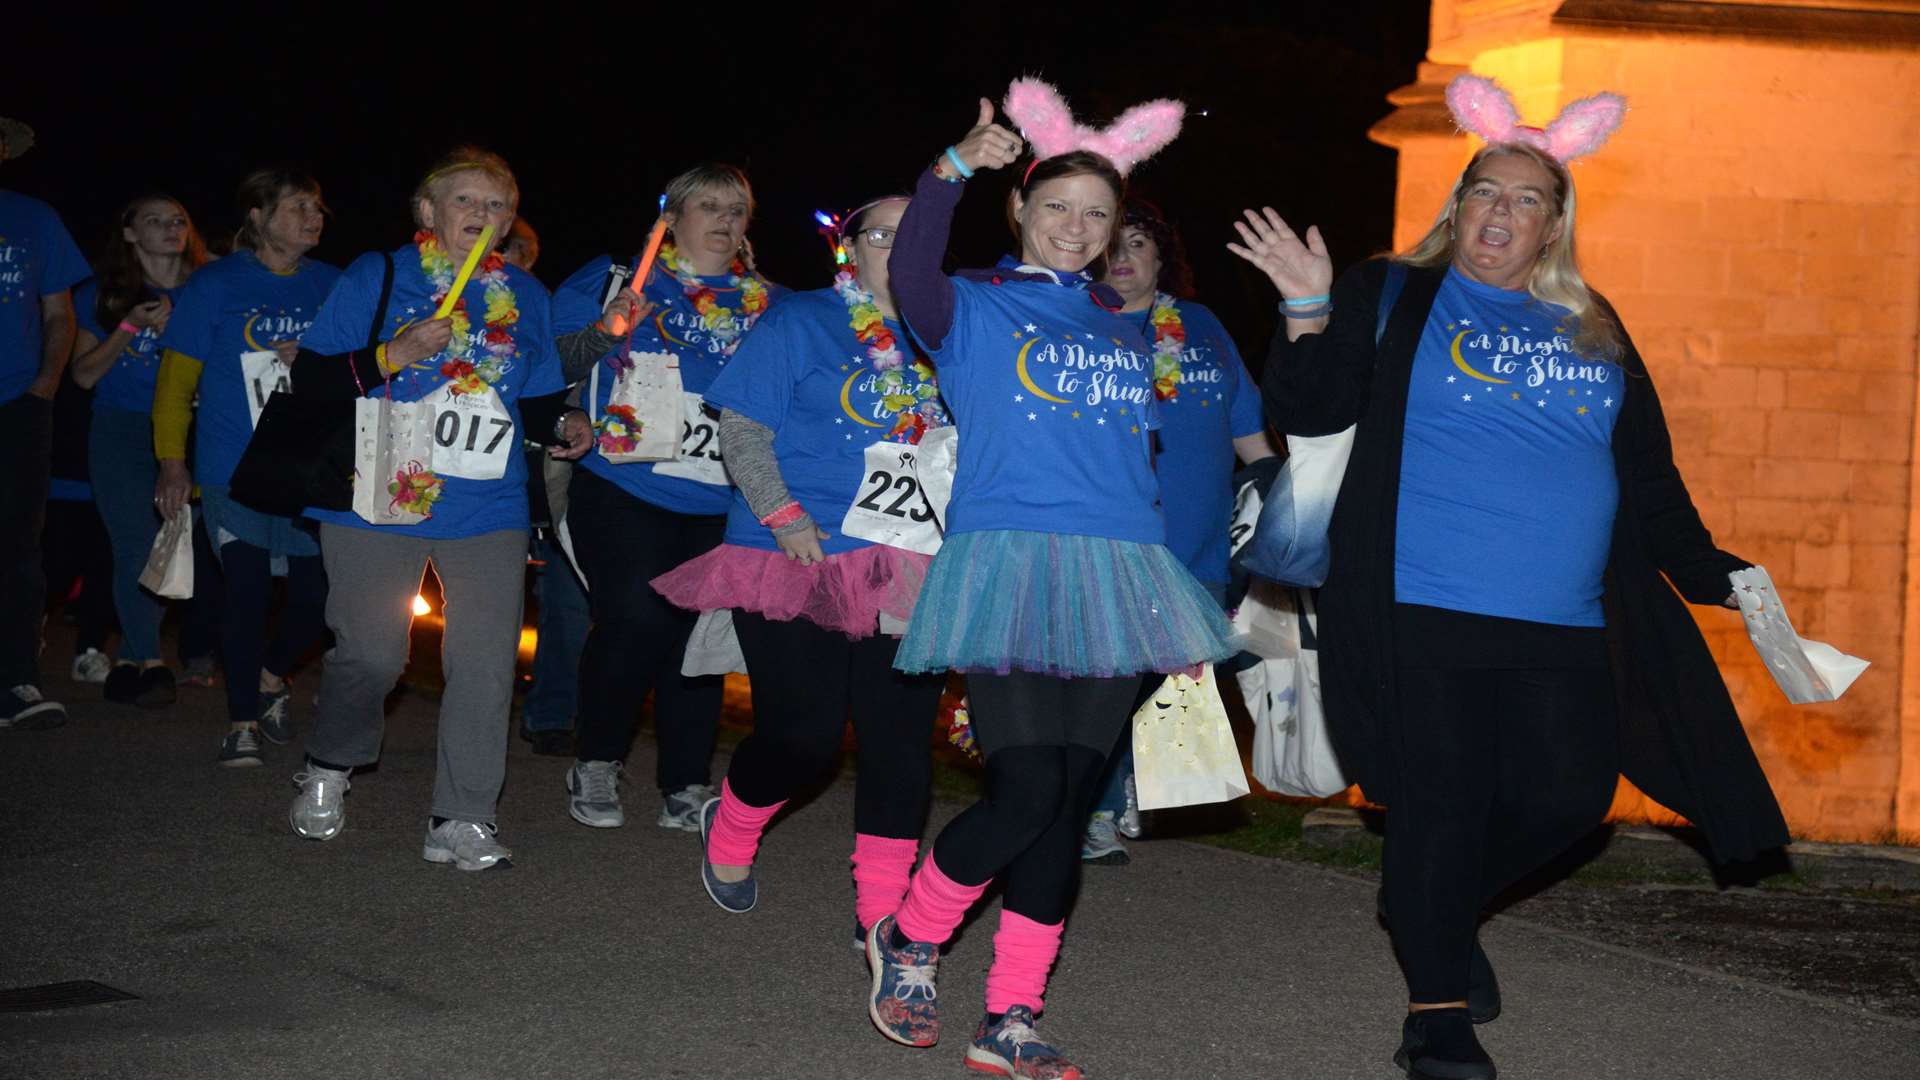 Participants in the Pilgrims Hospice lantern lit charity walk in Canterbury